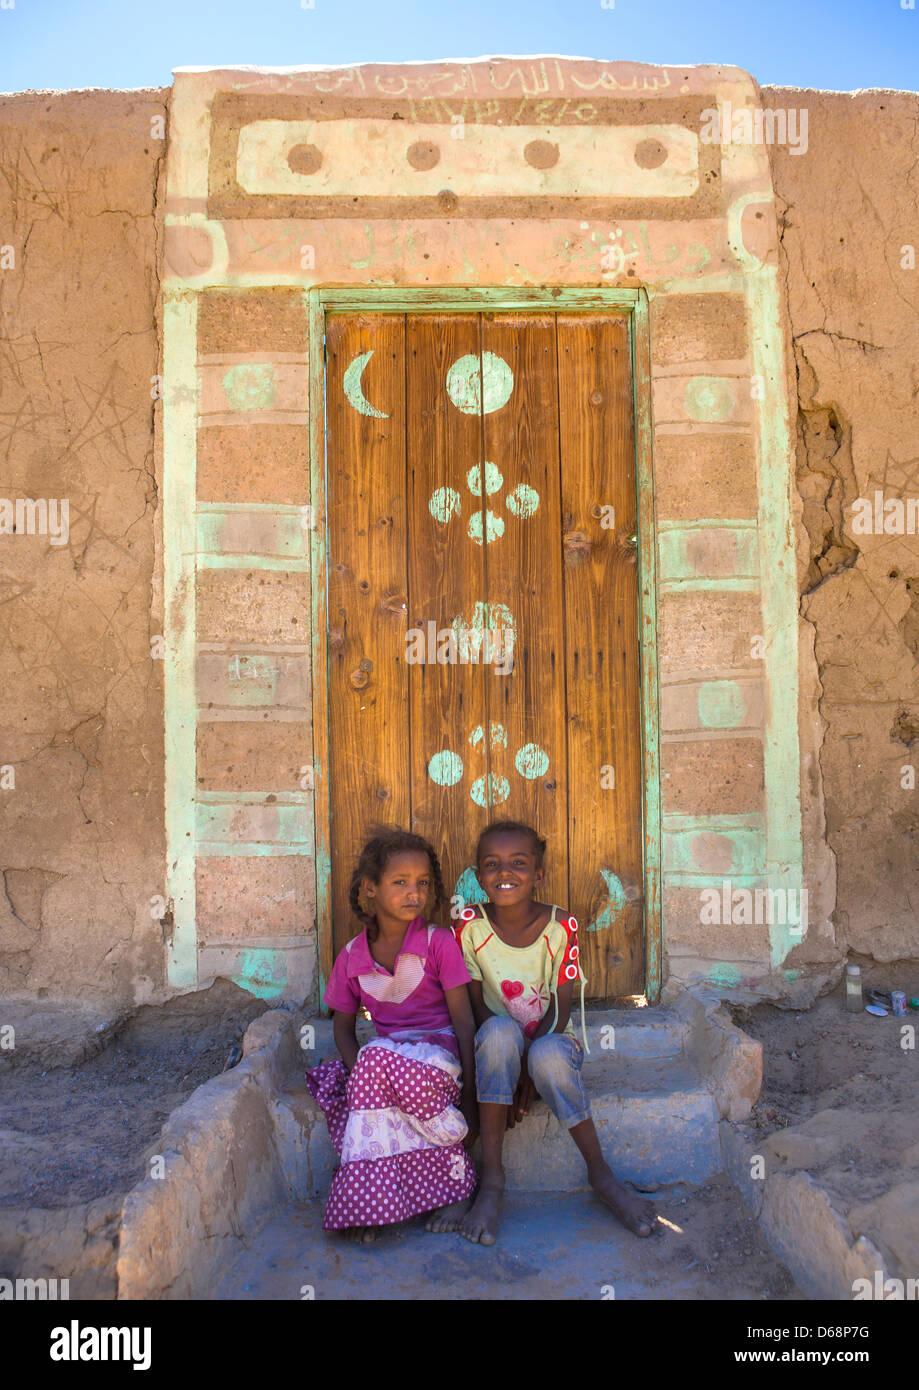 Traditional Nubian Architecture Of A Doorway, Gunfal, Sudan Stock Photo